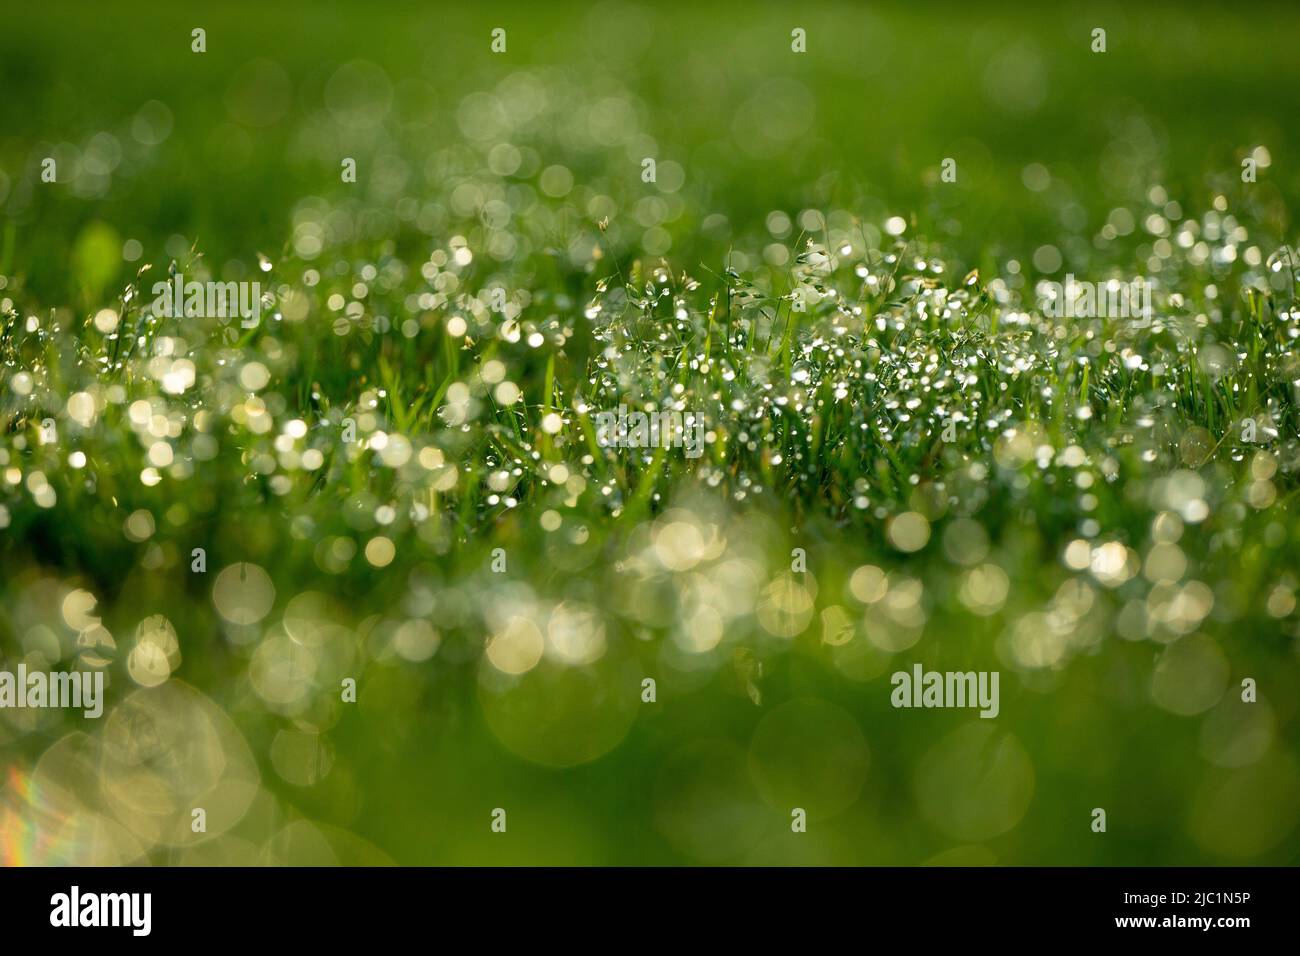 Bright green blurred grass background with water drops. Stock Photo